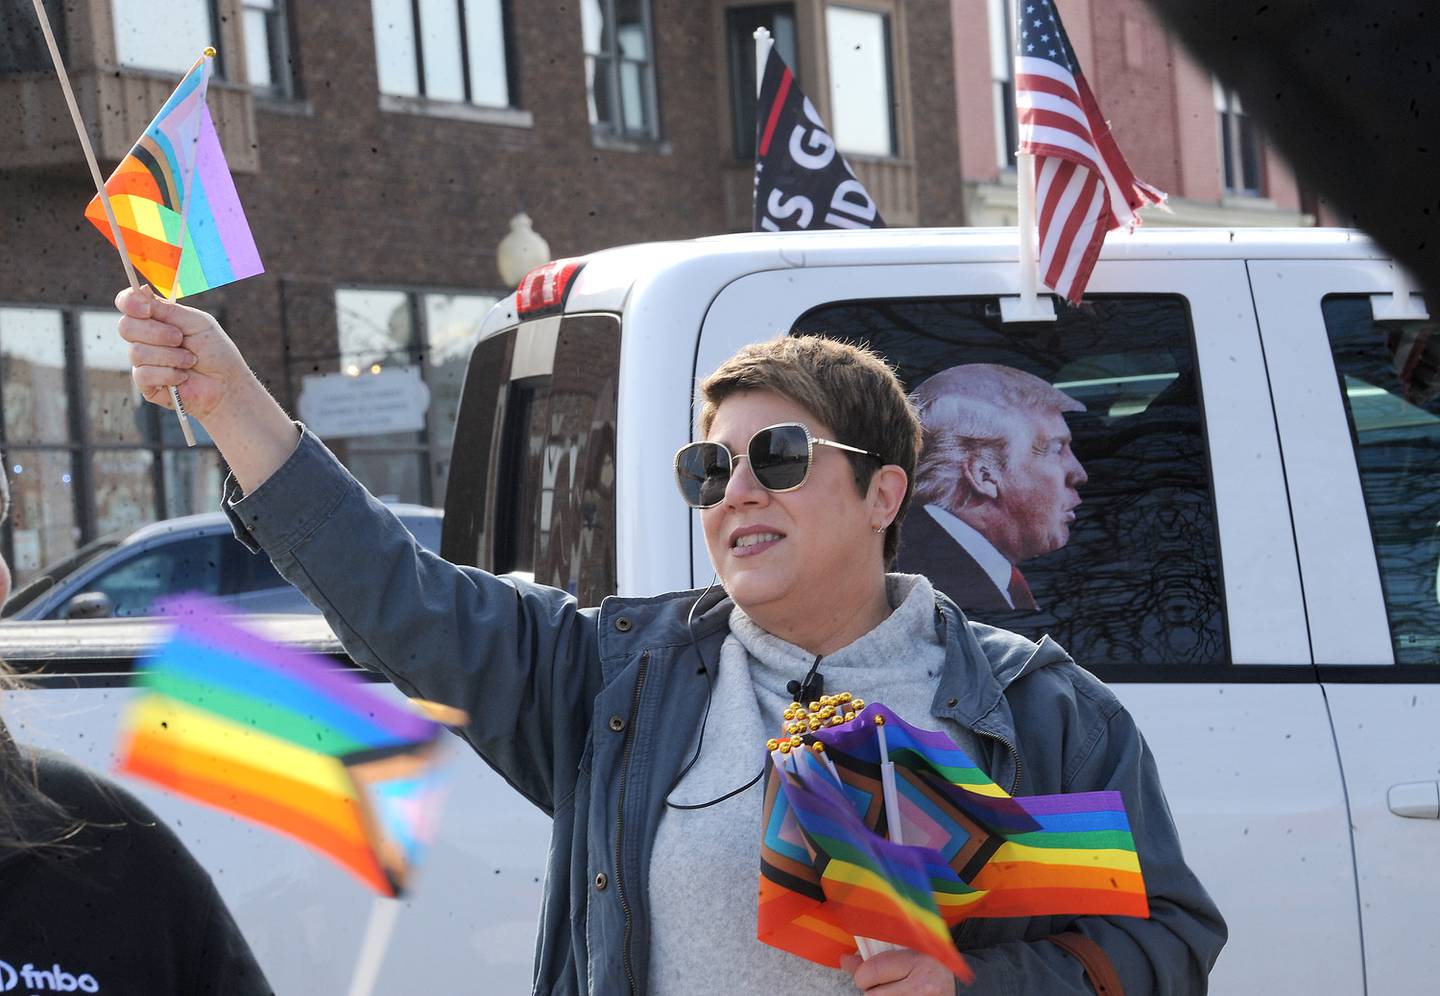 LGBTQ supporter Laura Bobrowsky waves at drivers, while handing out pride flags in front of the Sandwich Opera House on Saturday, Feb. 18, 2023.